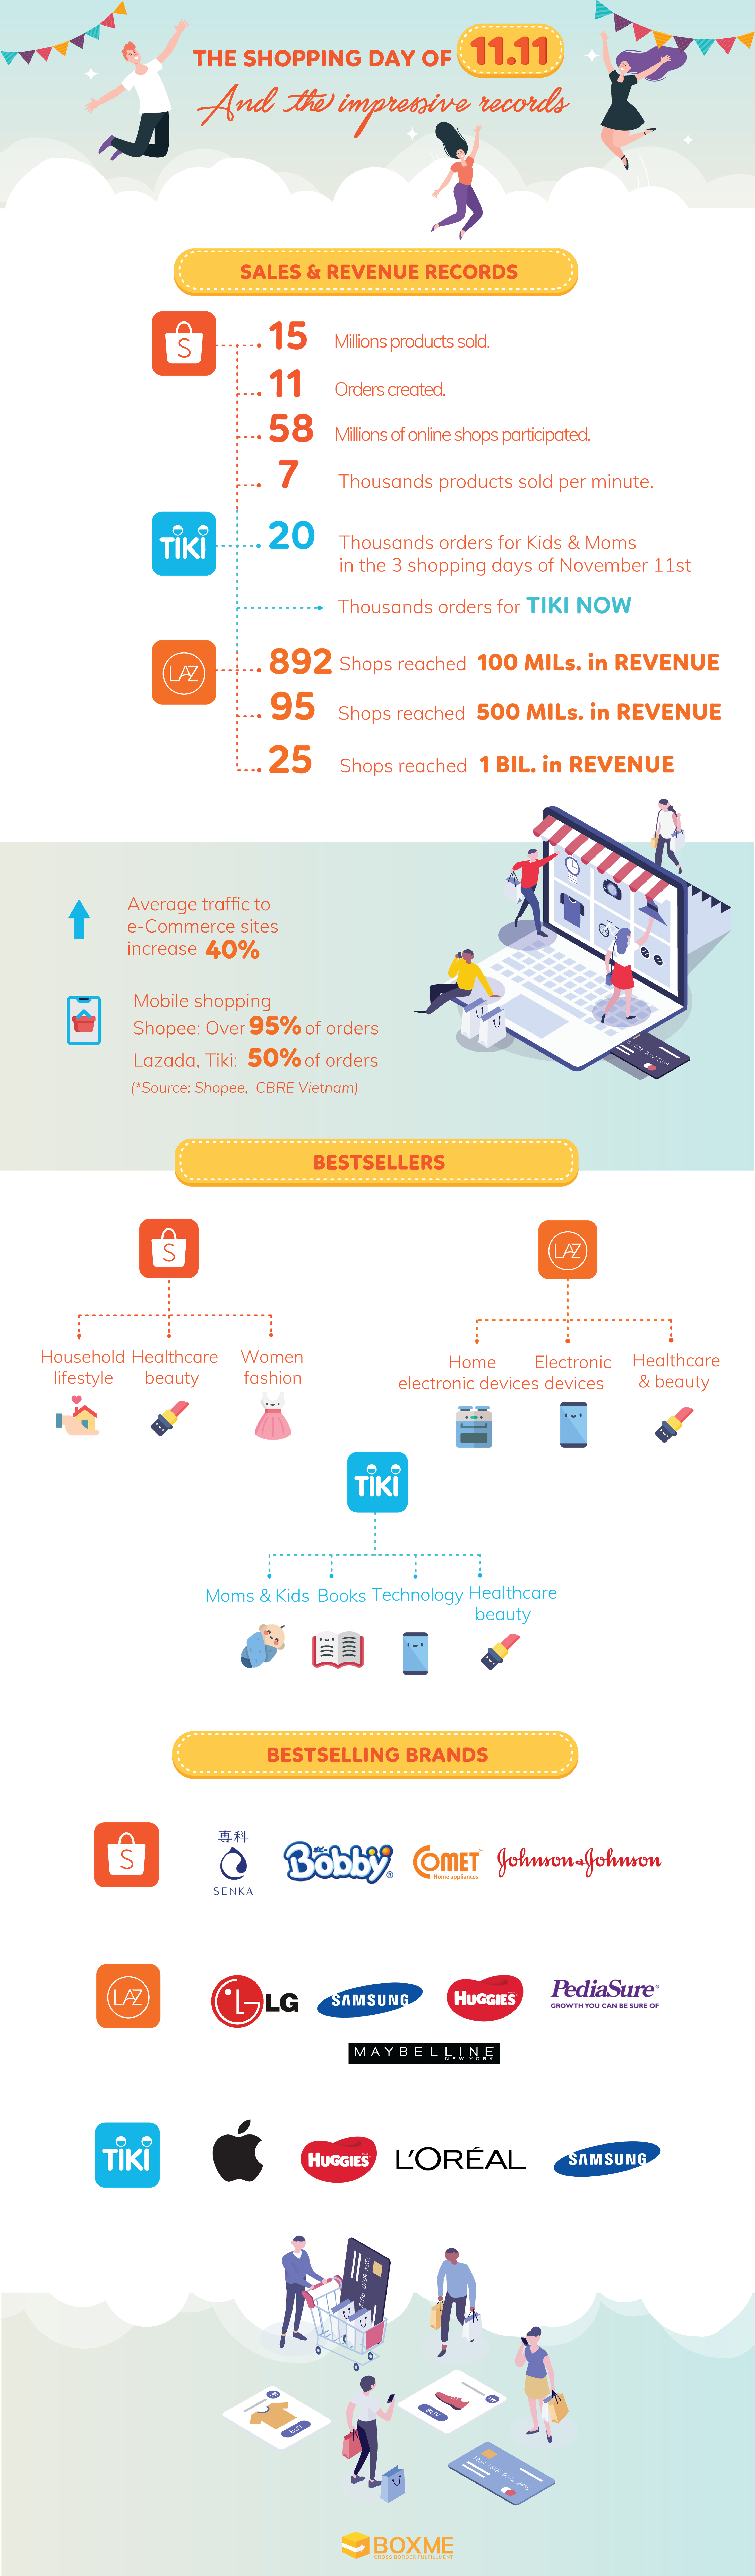 [Infographic] Singles' Day (November 11st, 2018) shopping festival and the impressive records 2